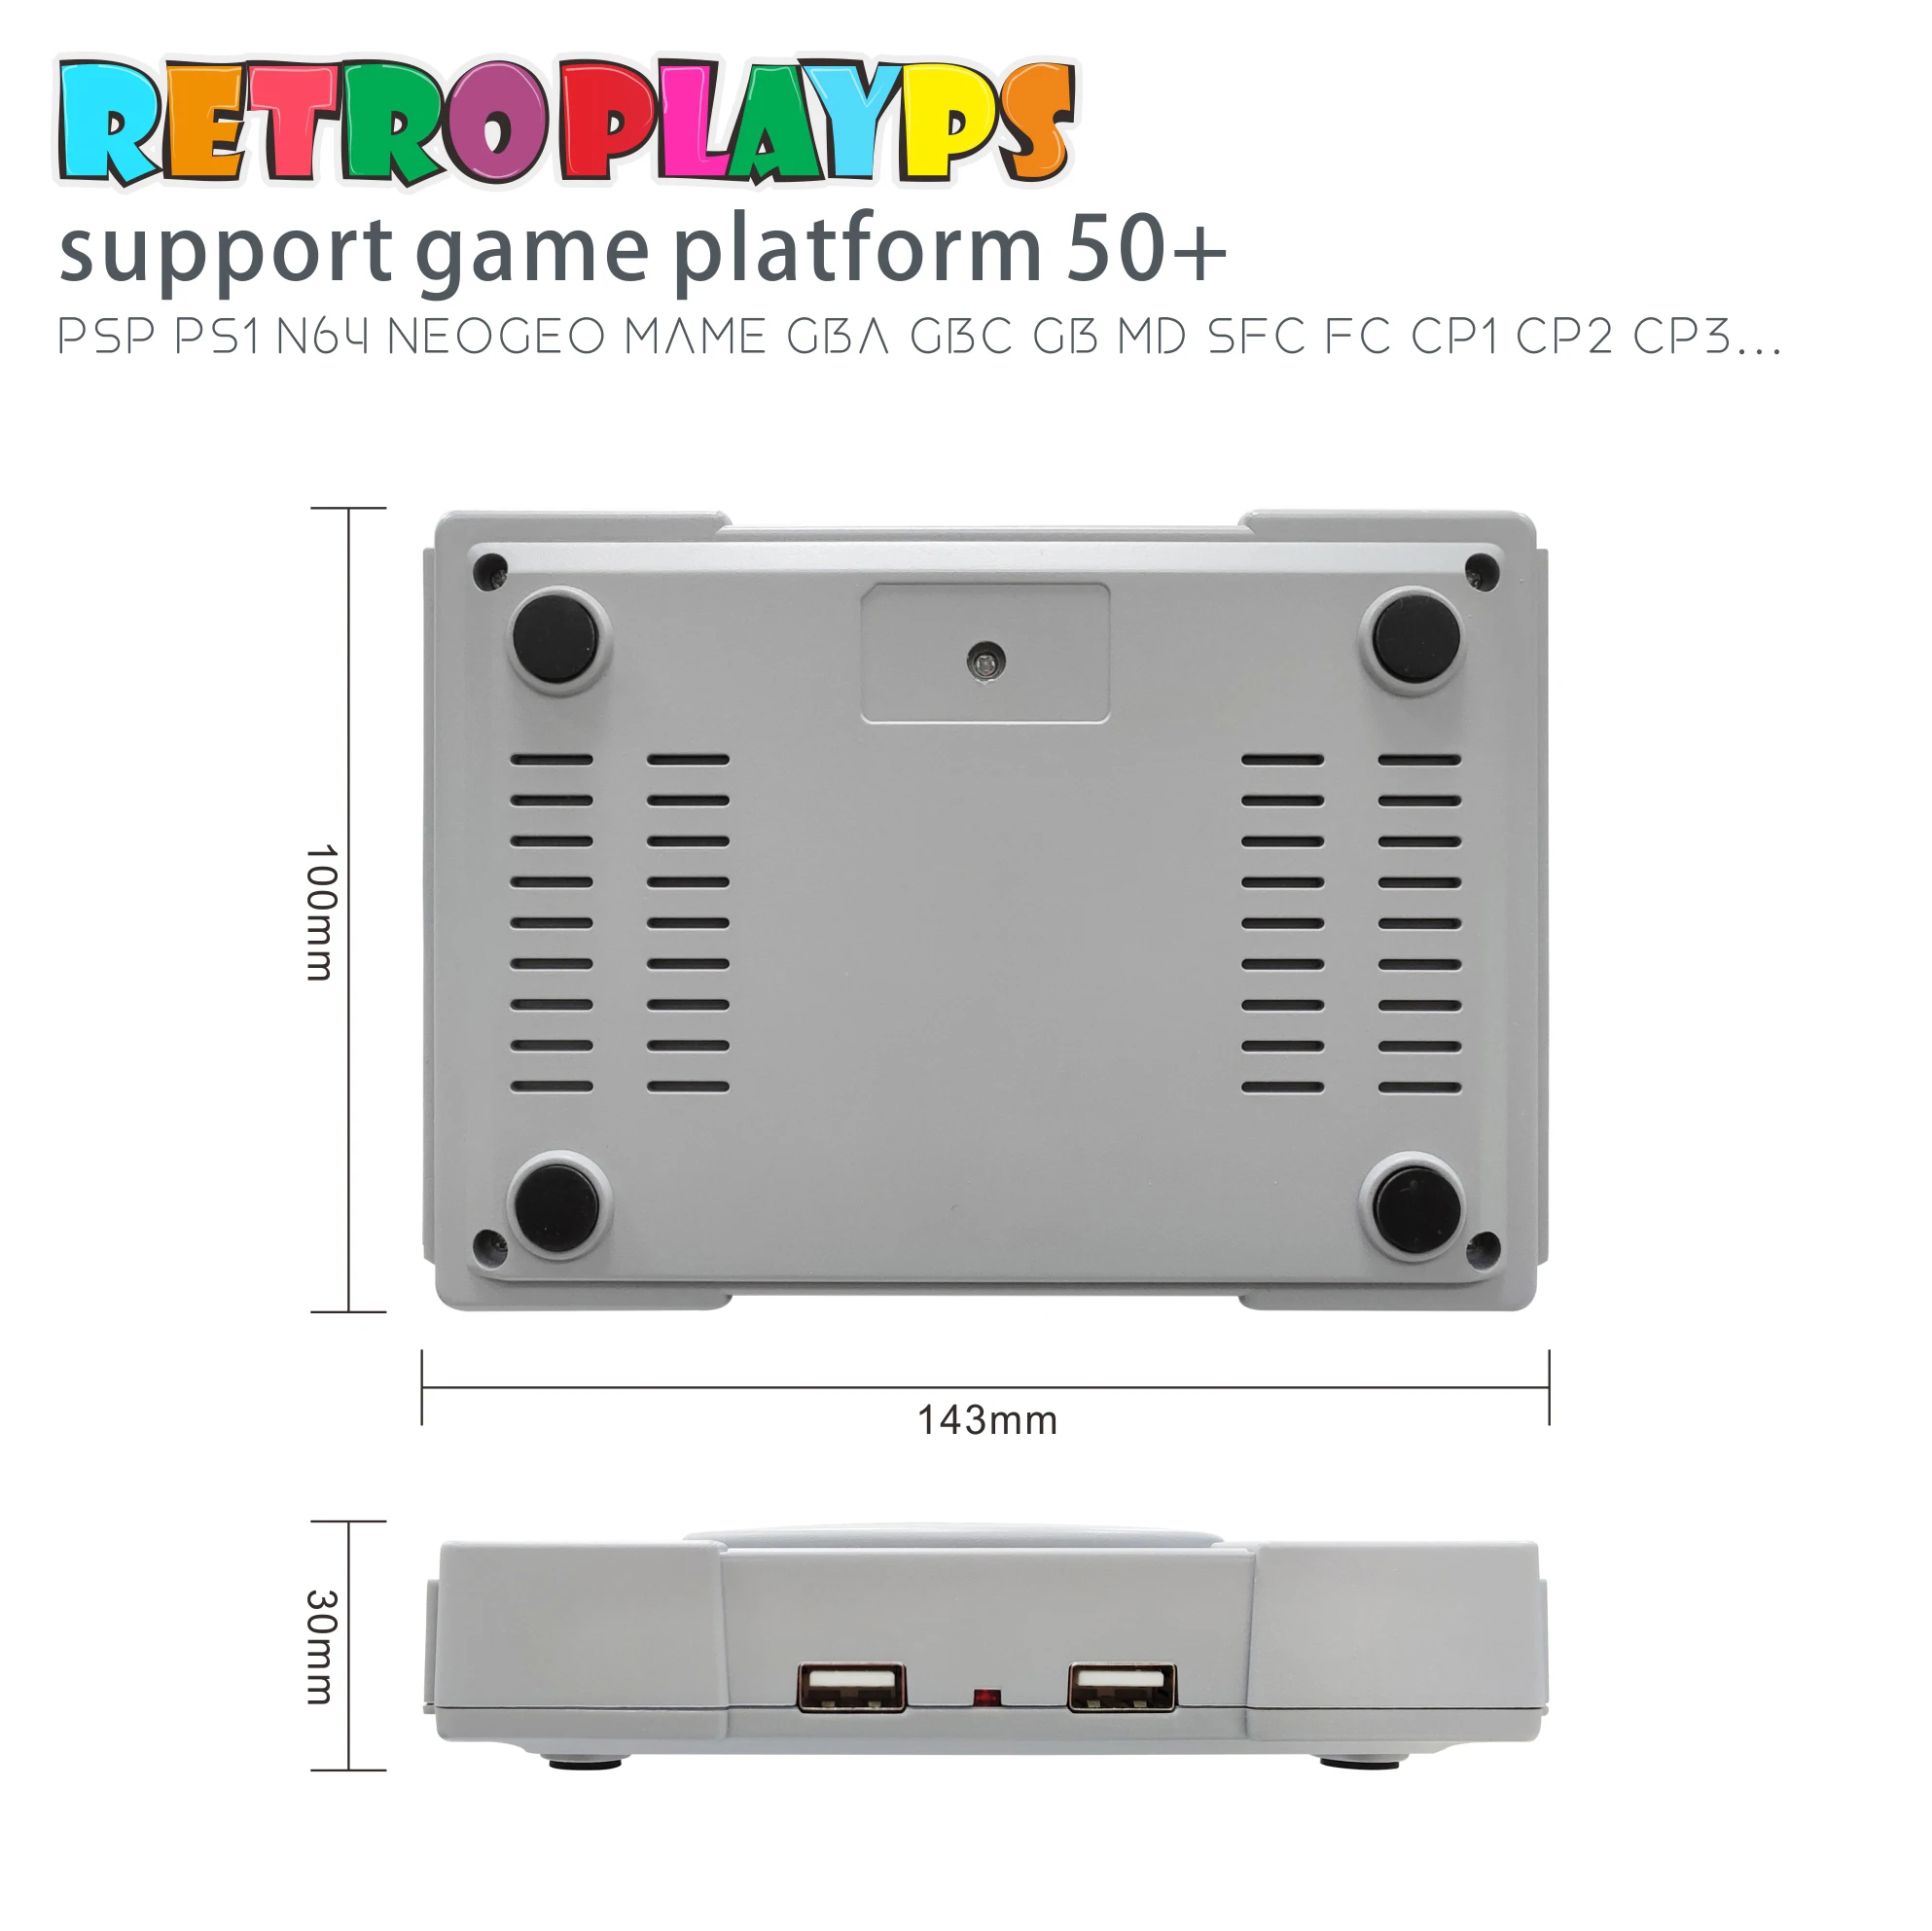 HANHIBR Raspberry Pi console HD TV video game console retropi system n64 games ps1 psp games pi boy built-in 7000+ games gamepad